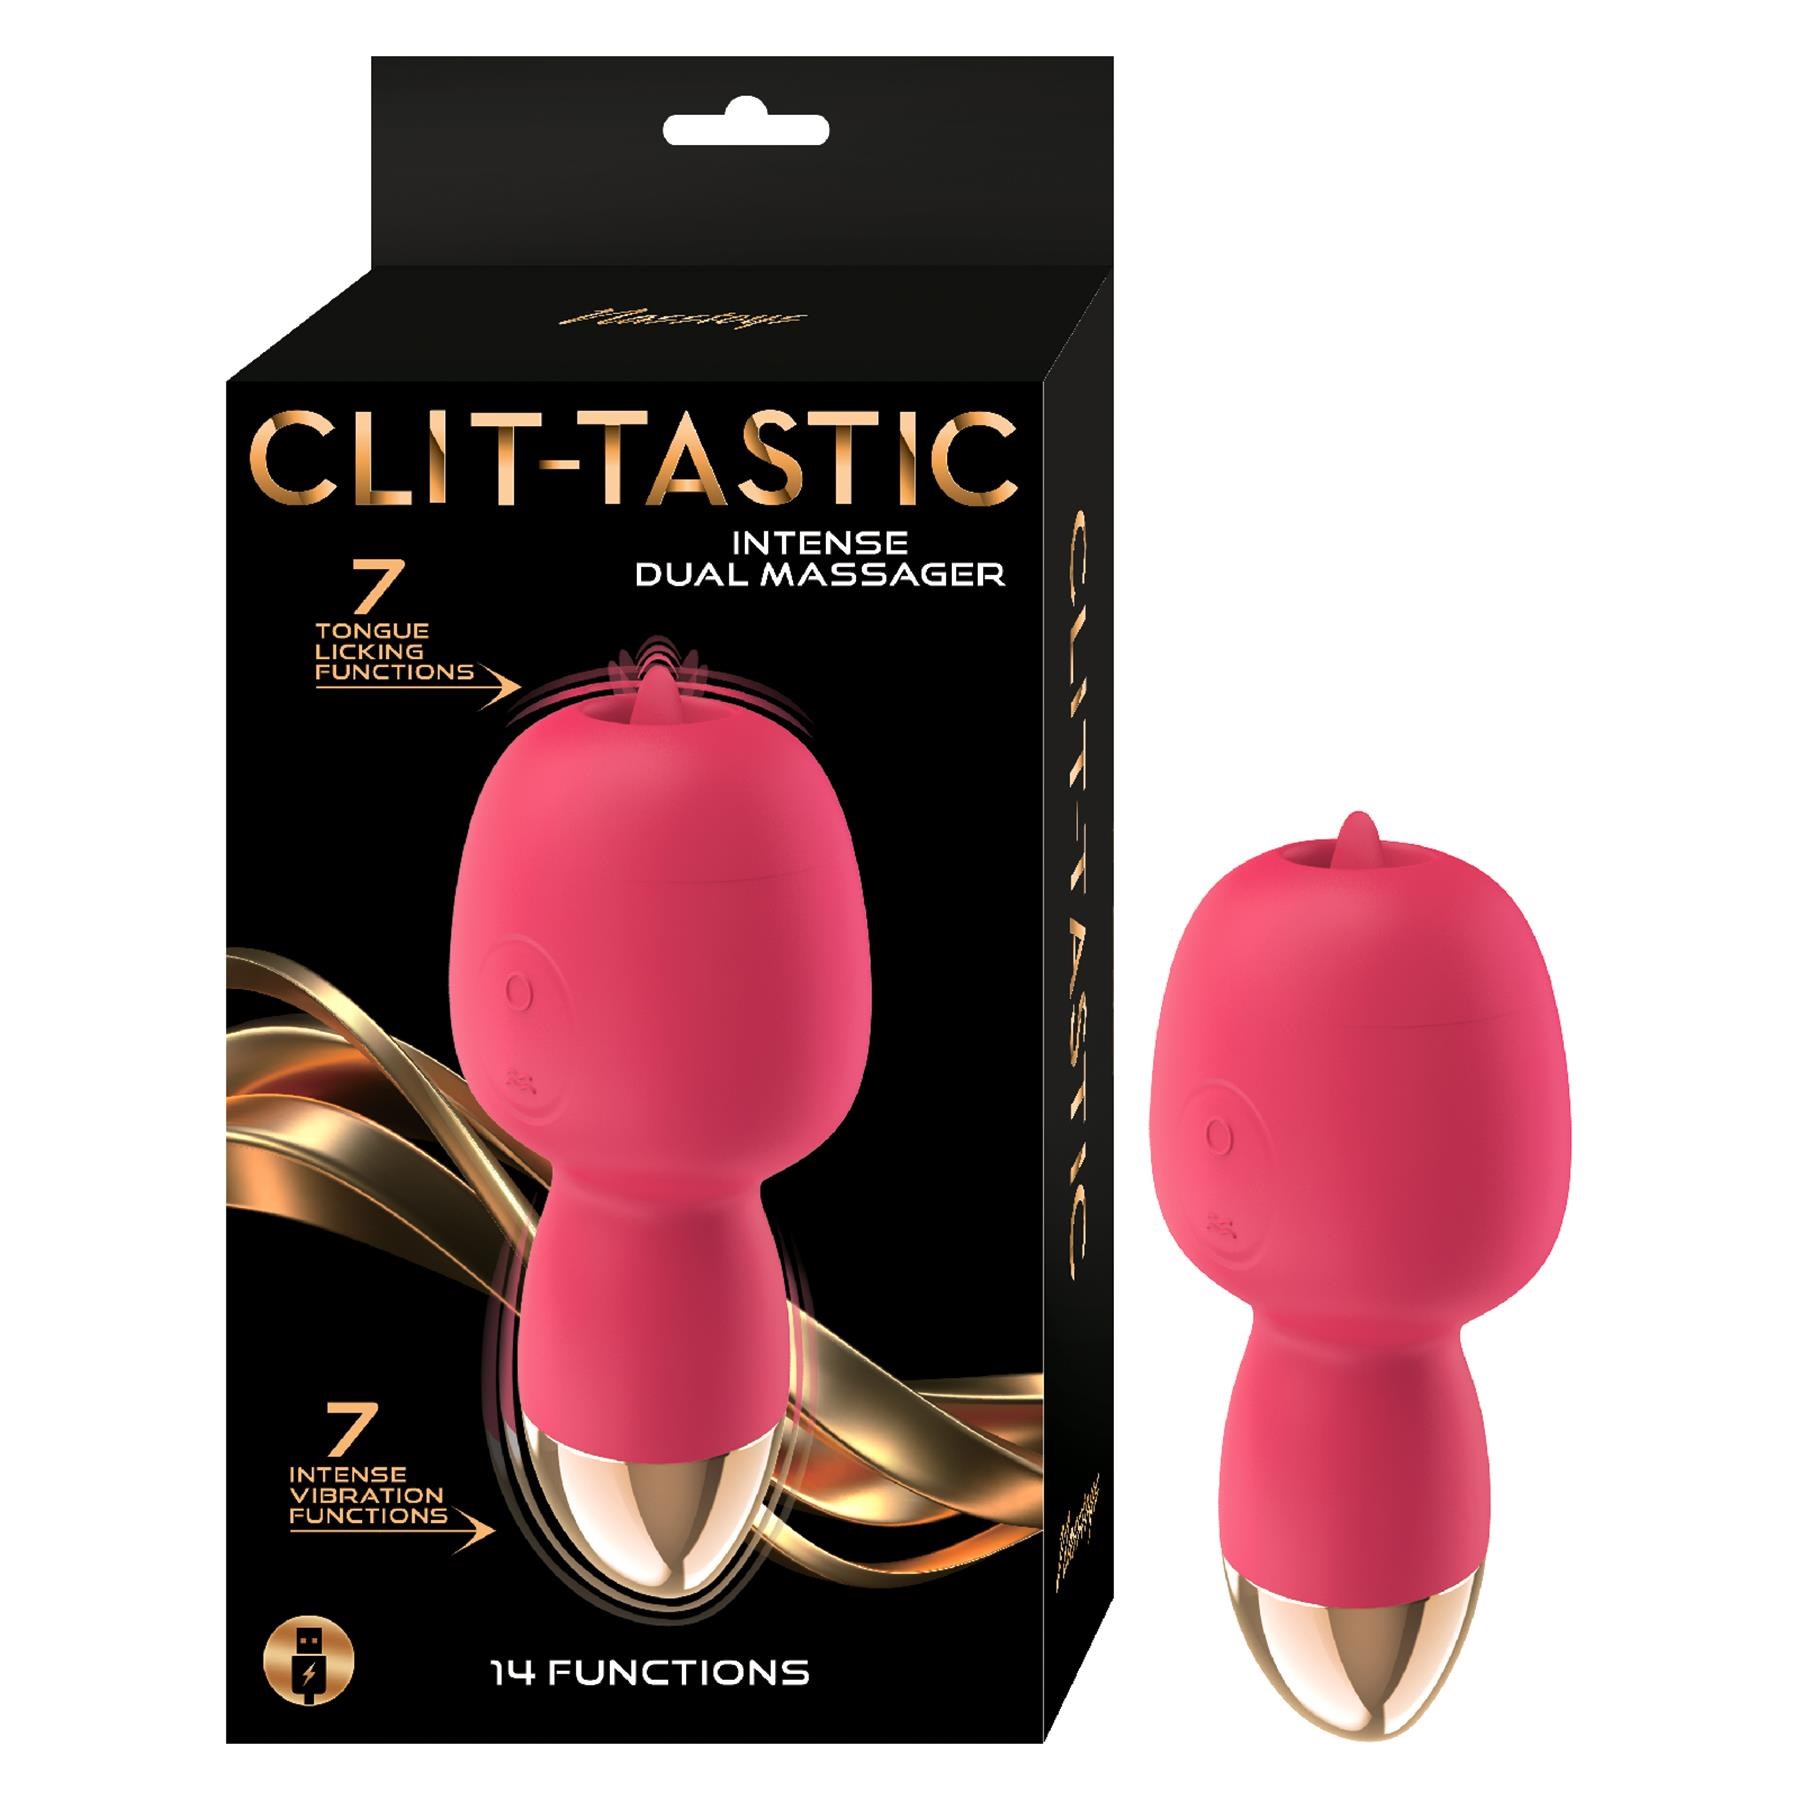 Clit-Tastic Intense Dual Massager - Product and Packaging